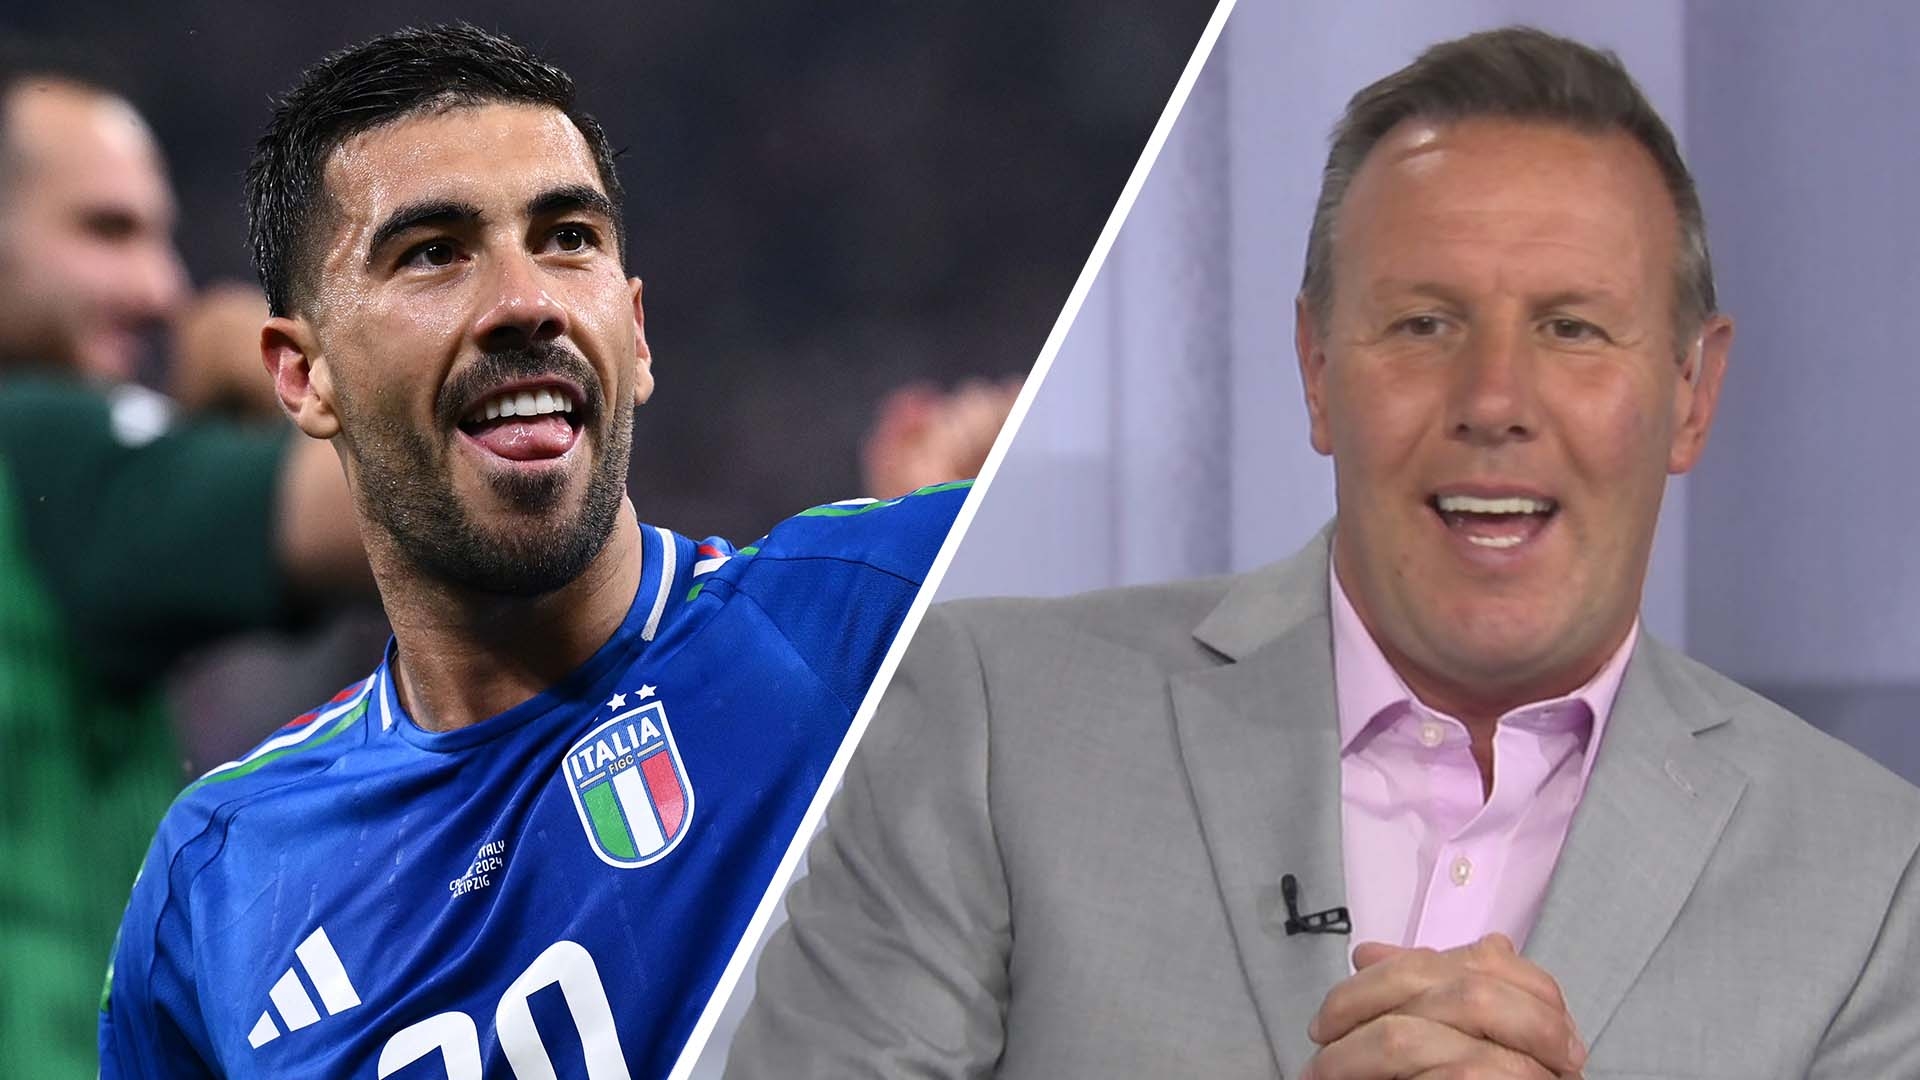 Burley: Italy will get knocked out by the first good team they face